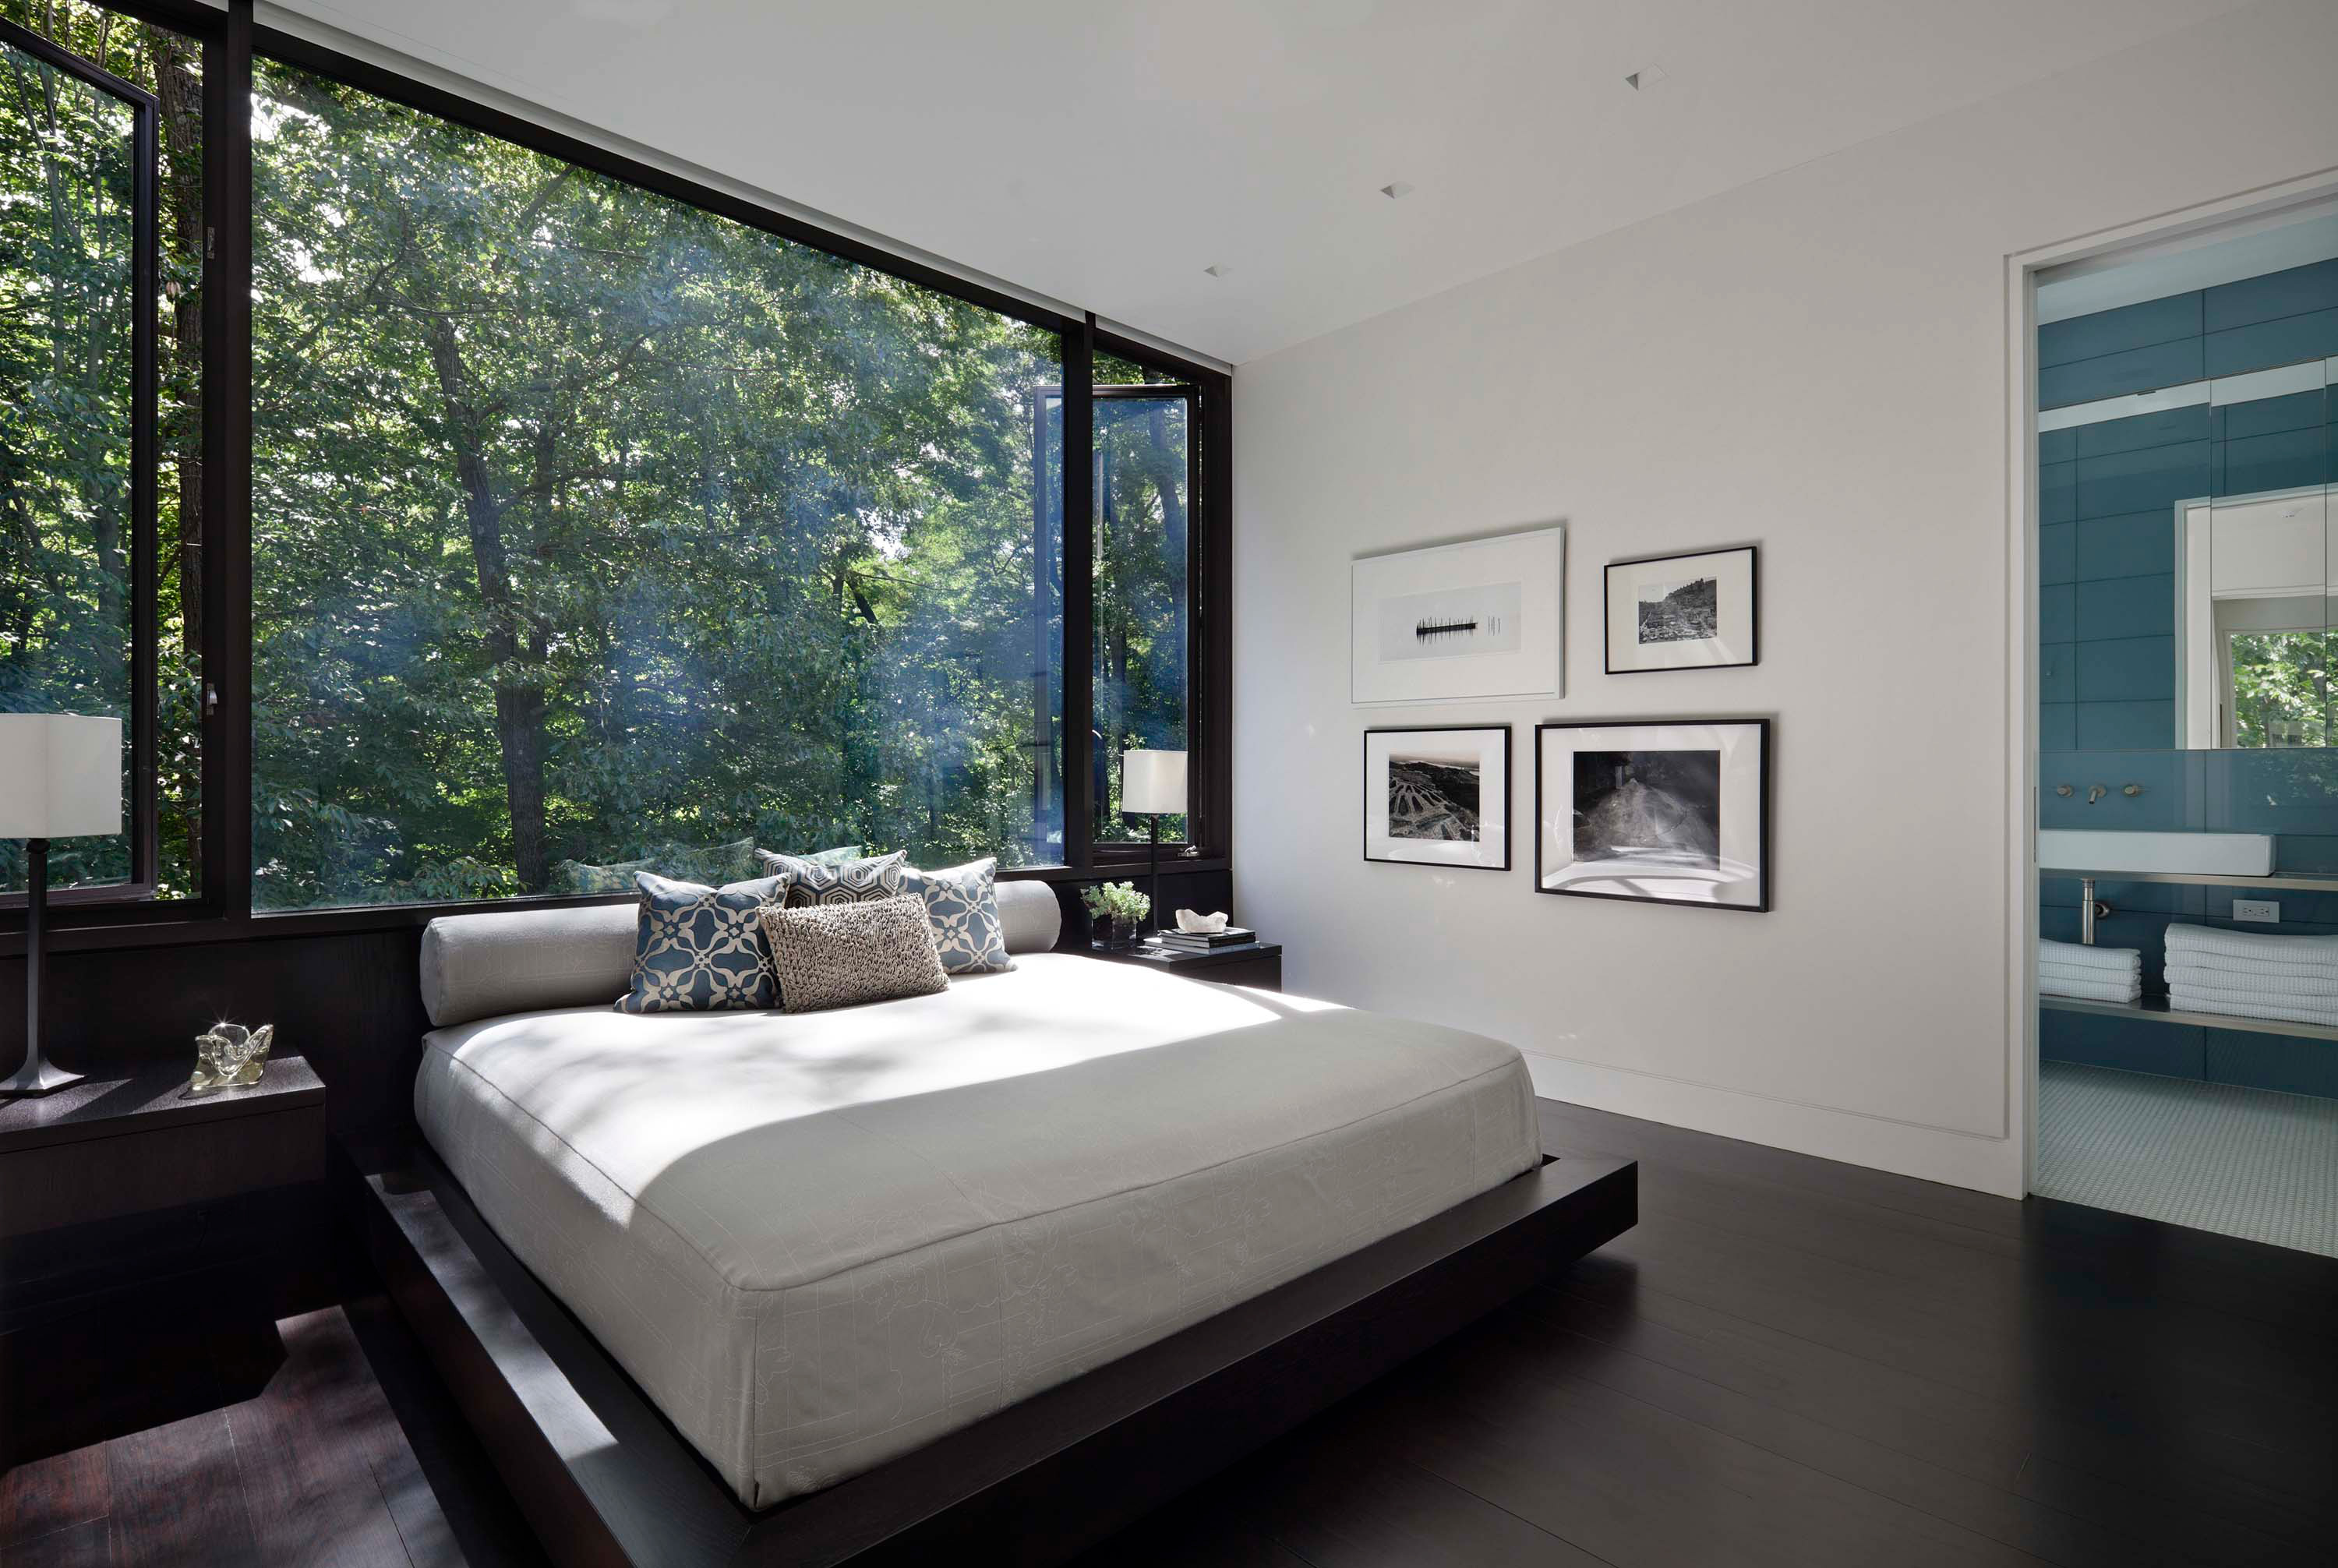 Interior photo of the New Canaan Residence by Specht Novak Architects. Shot by Elizabeth Felicella featuring a bedroom with a main glass wall and ensuite bathroom.